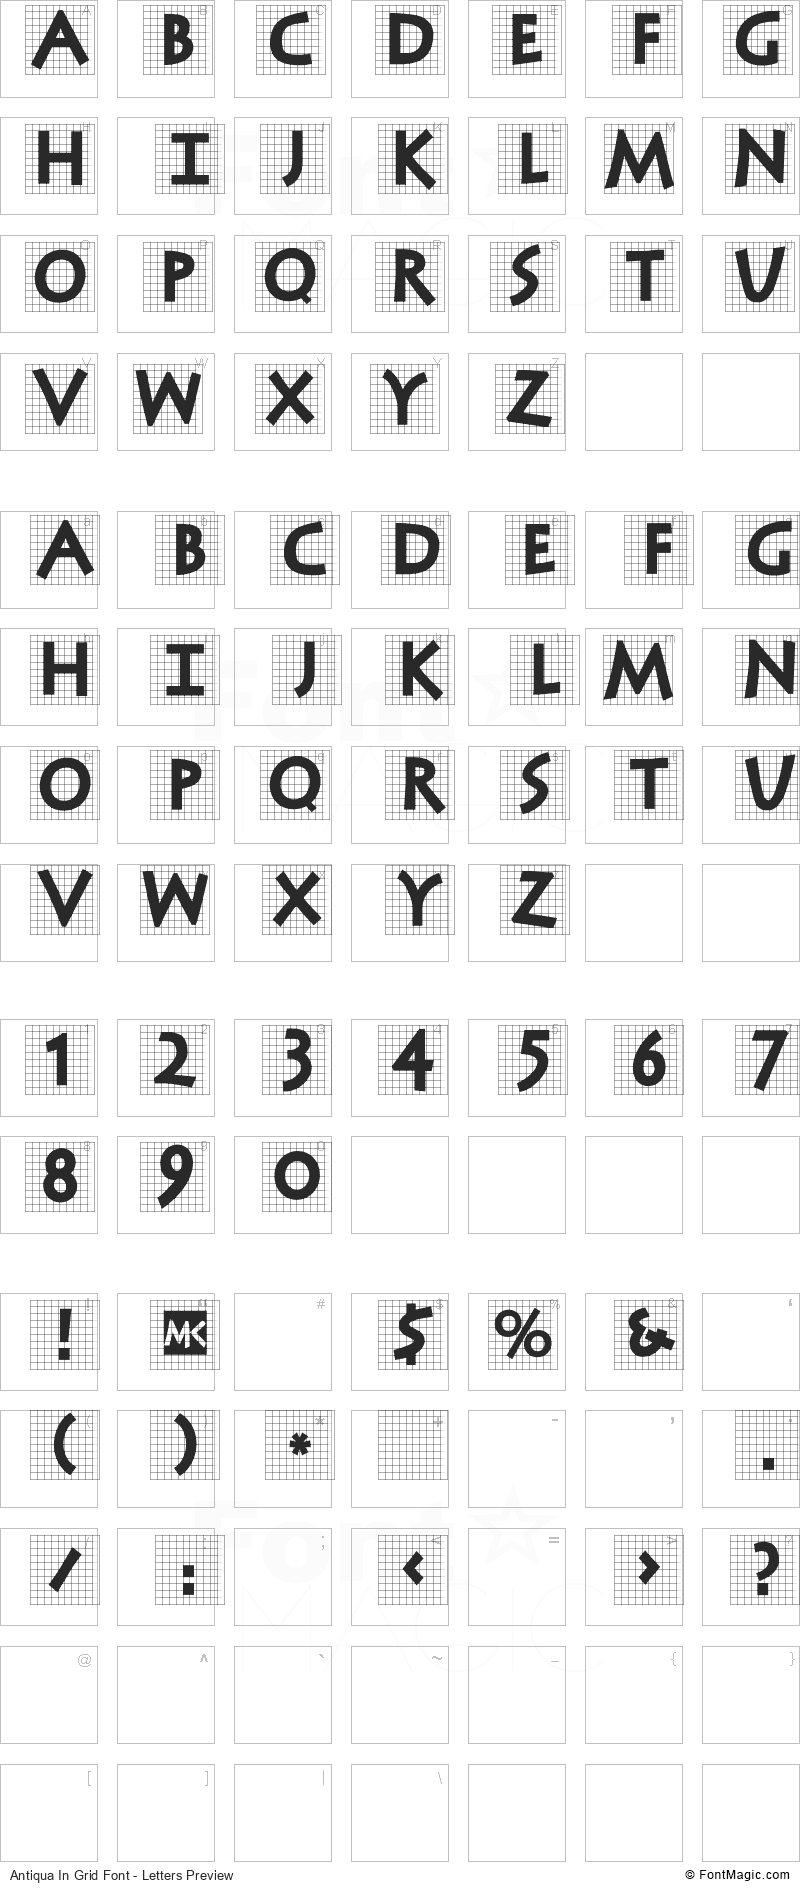 Antiqua In Grid Font - All Latters Preview Chart